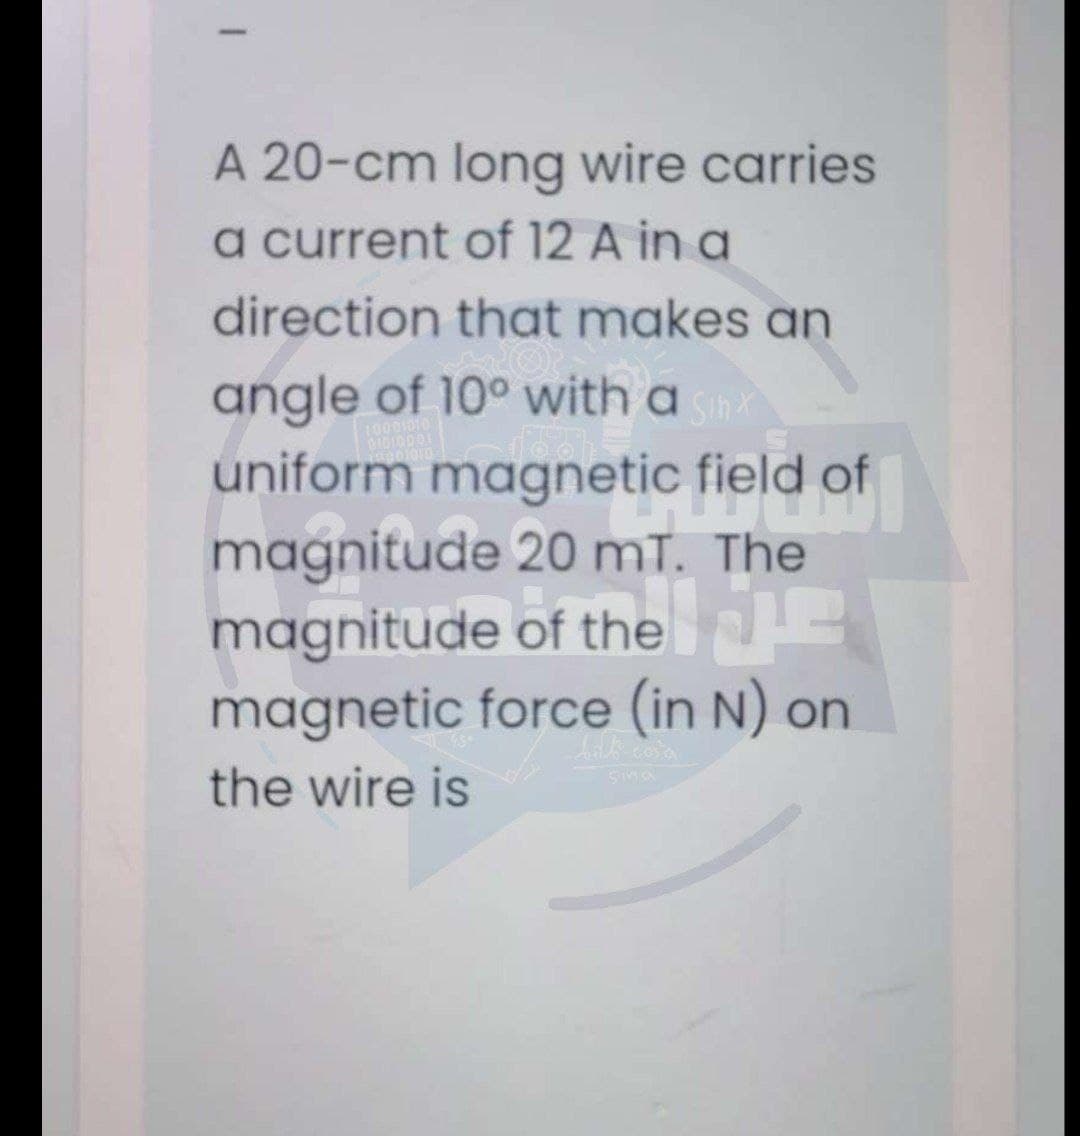 A 20-cm long wire carries
a current of 12 A in a
direction that makes an
angle of 10° with a
SinX
uniform magnetic field of
magnitude 20 mT. The
magnitude of the
magnetic force (in N) on
the wire is
Sina
